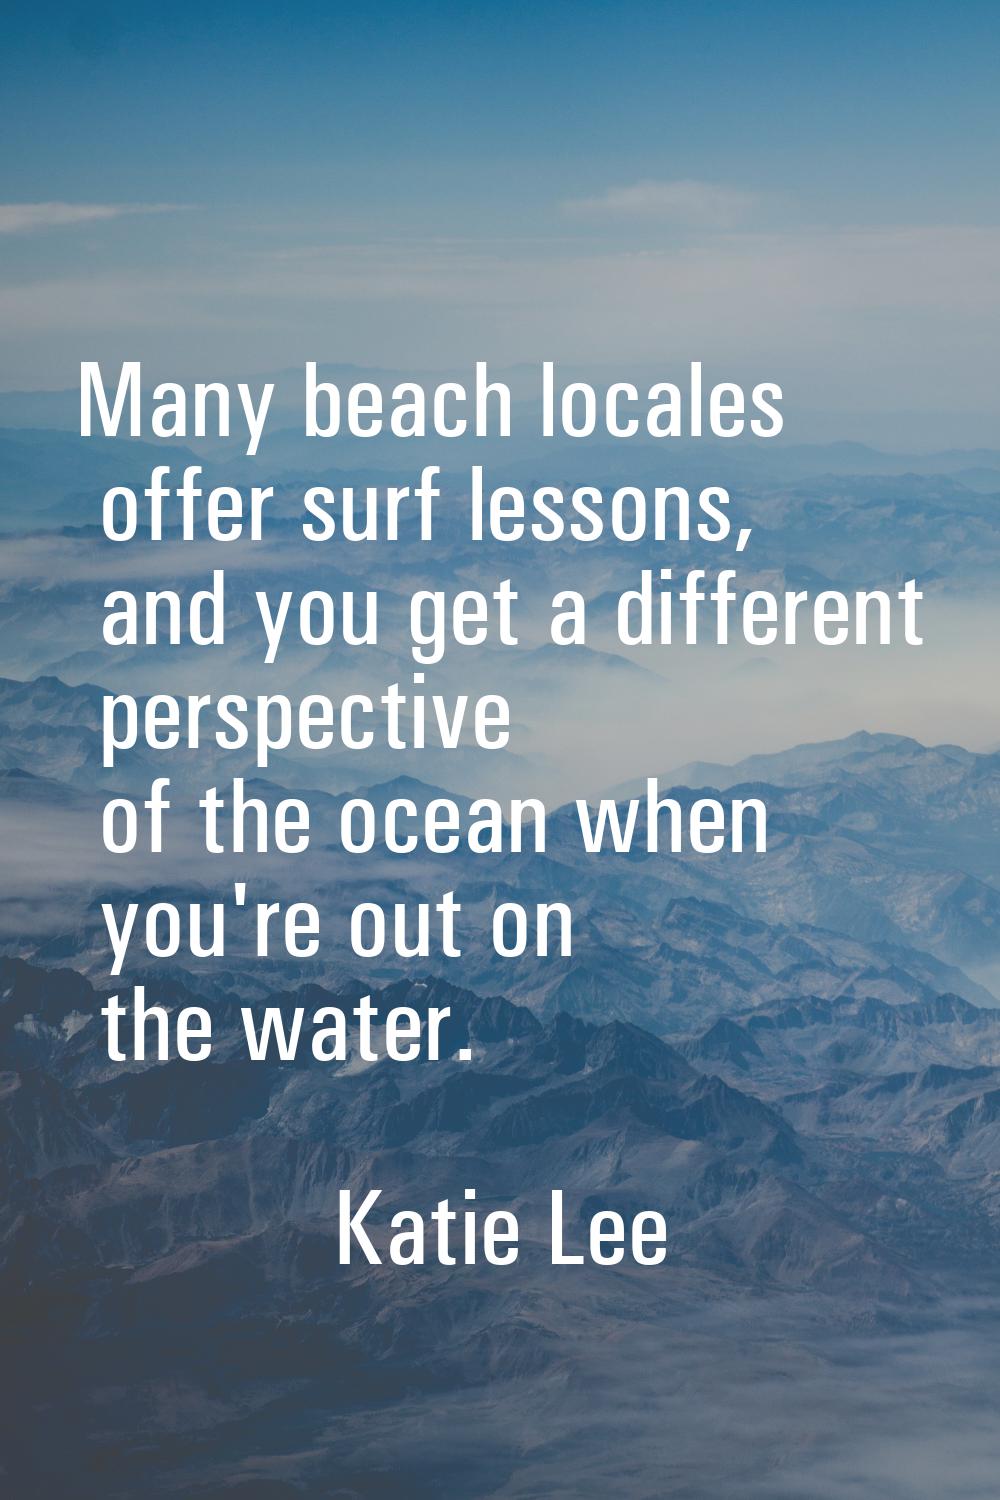 Many beach locales offer surf lessons, and you get a different perspective of the ocean when you're